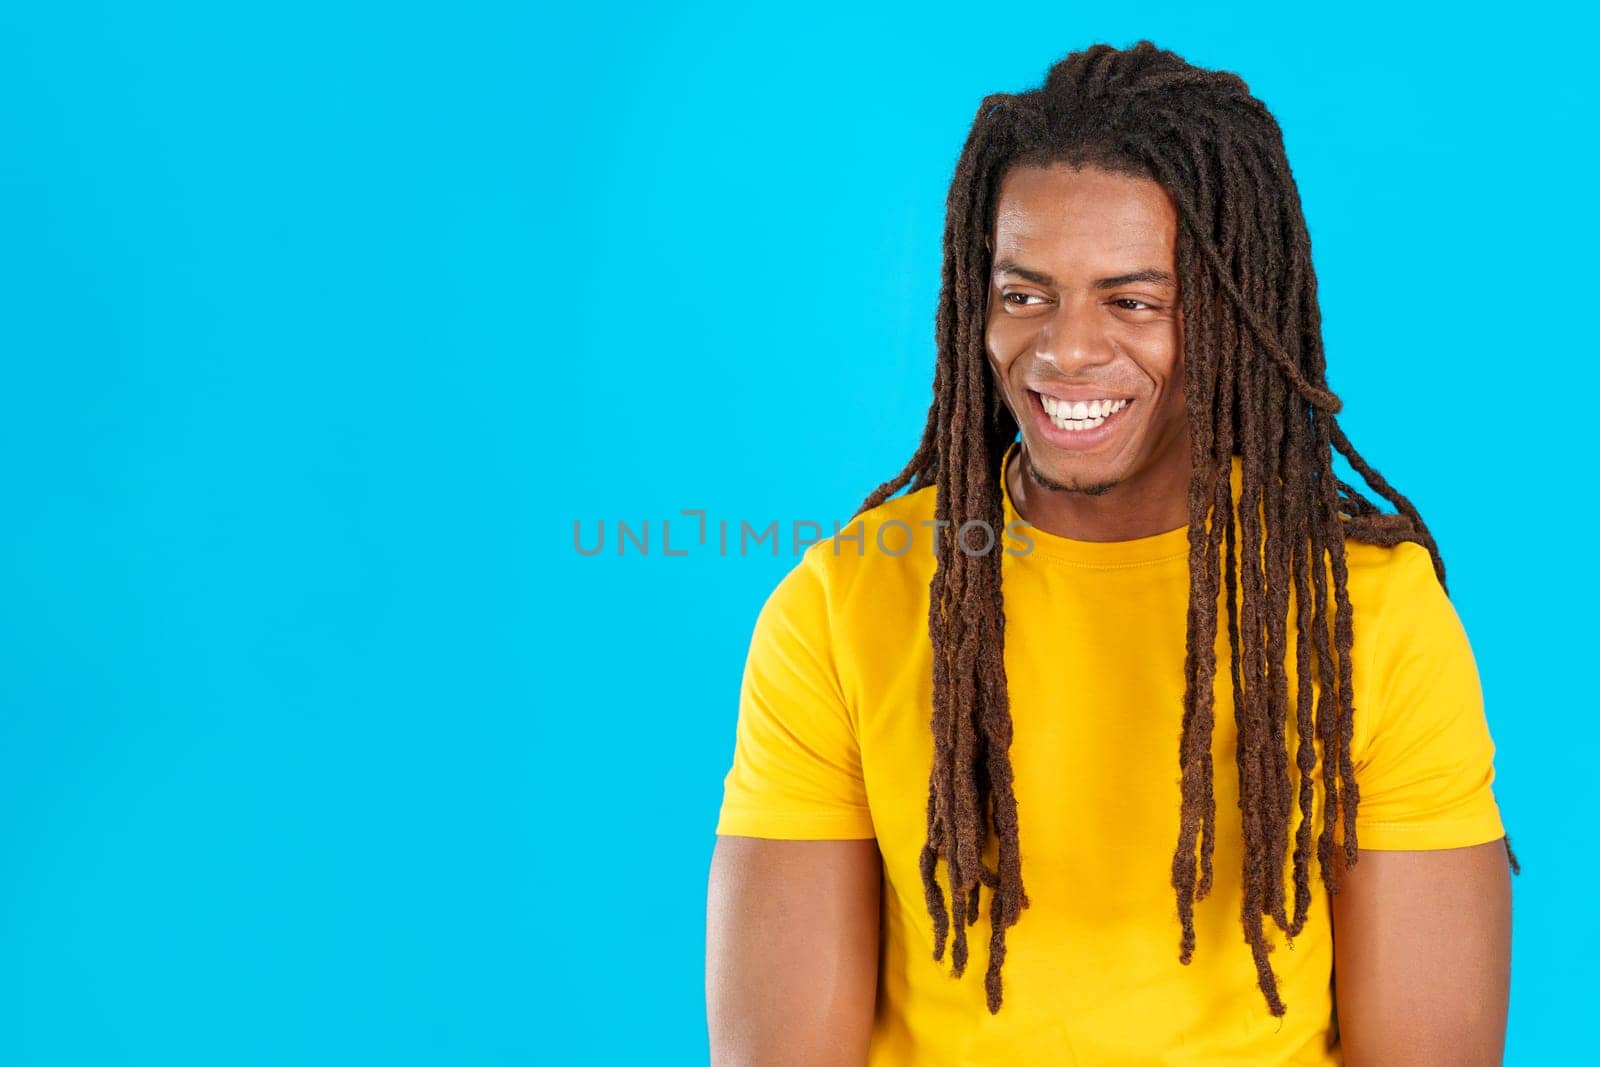 Distracted smiley latin man with dreadlocks in studio with blue background